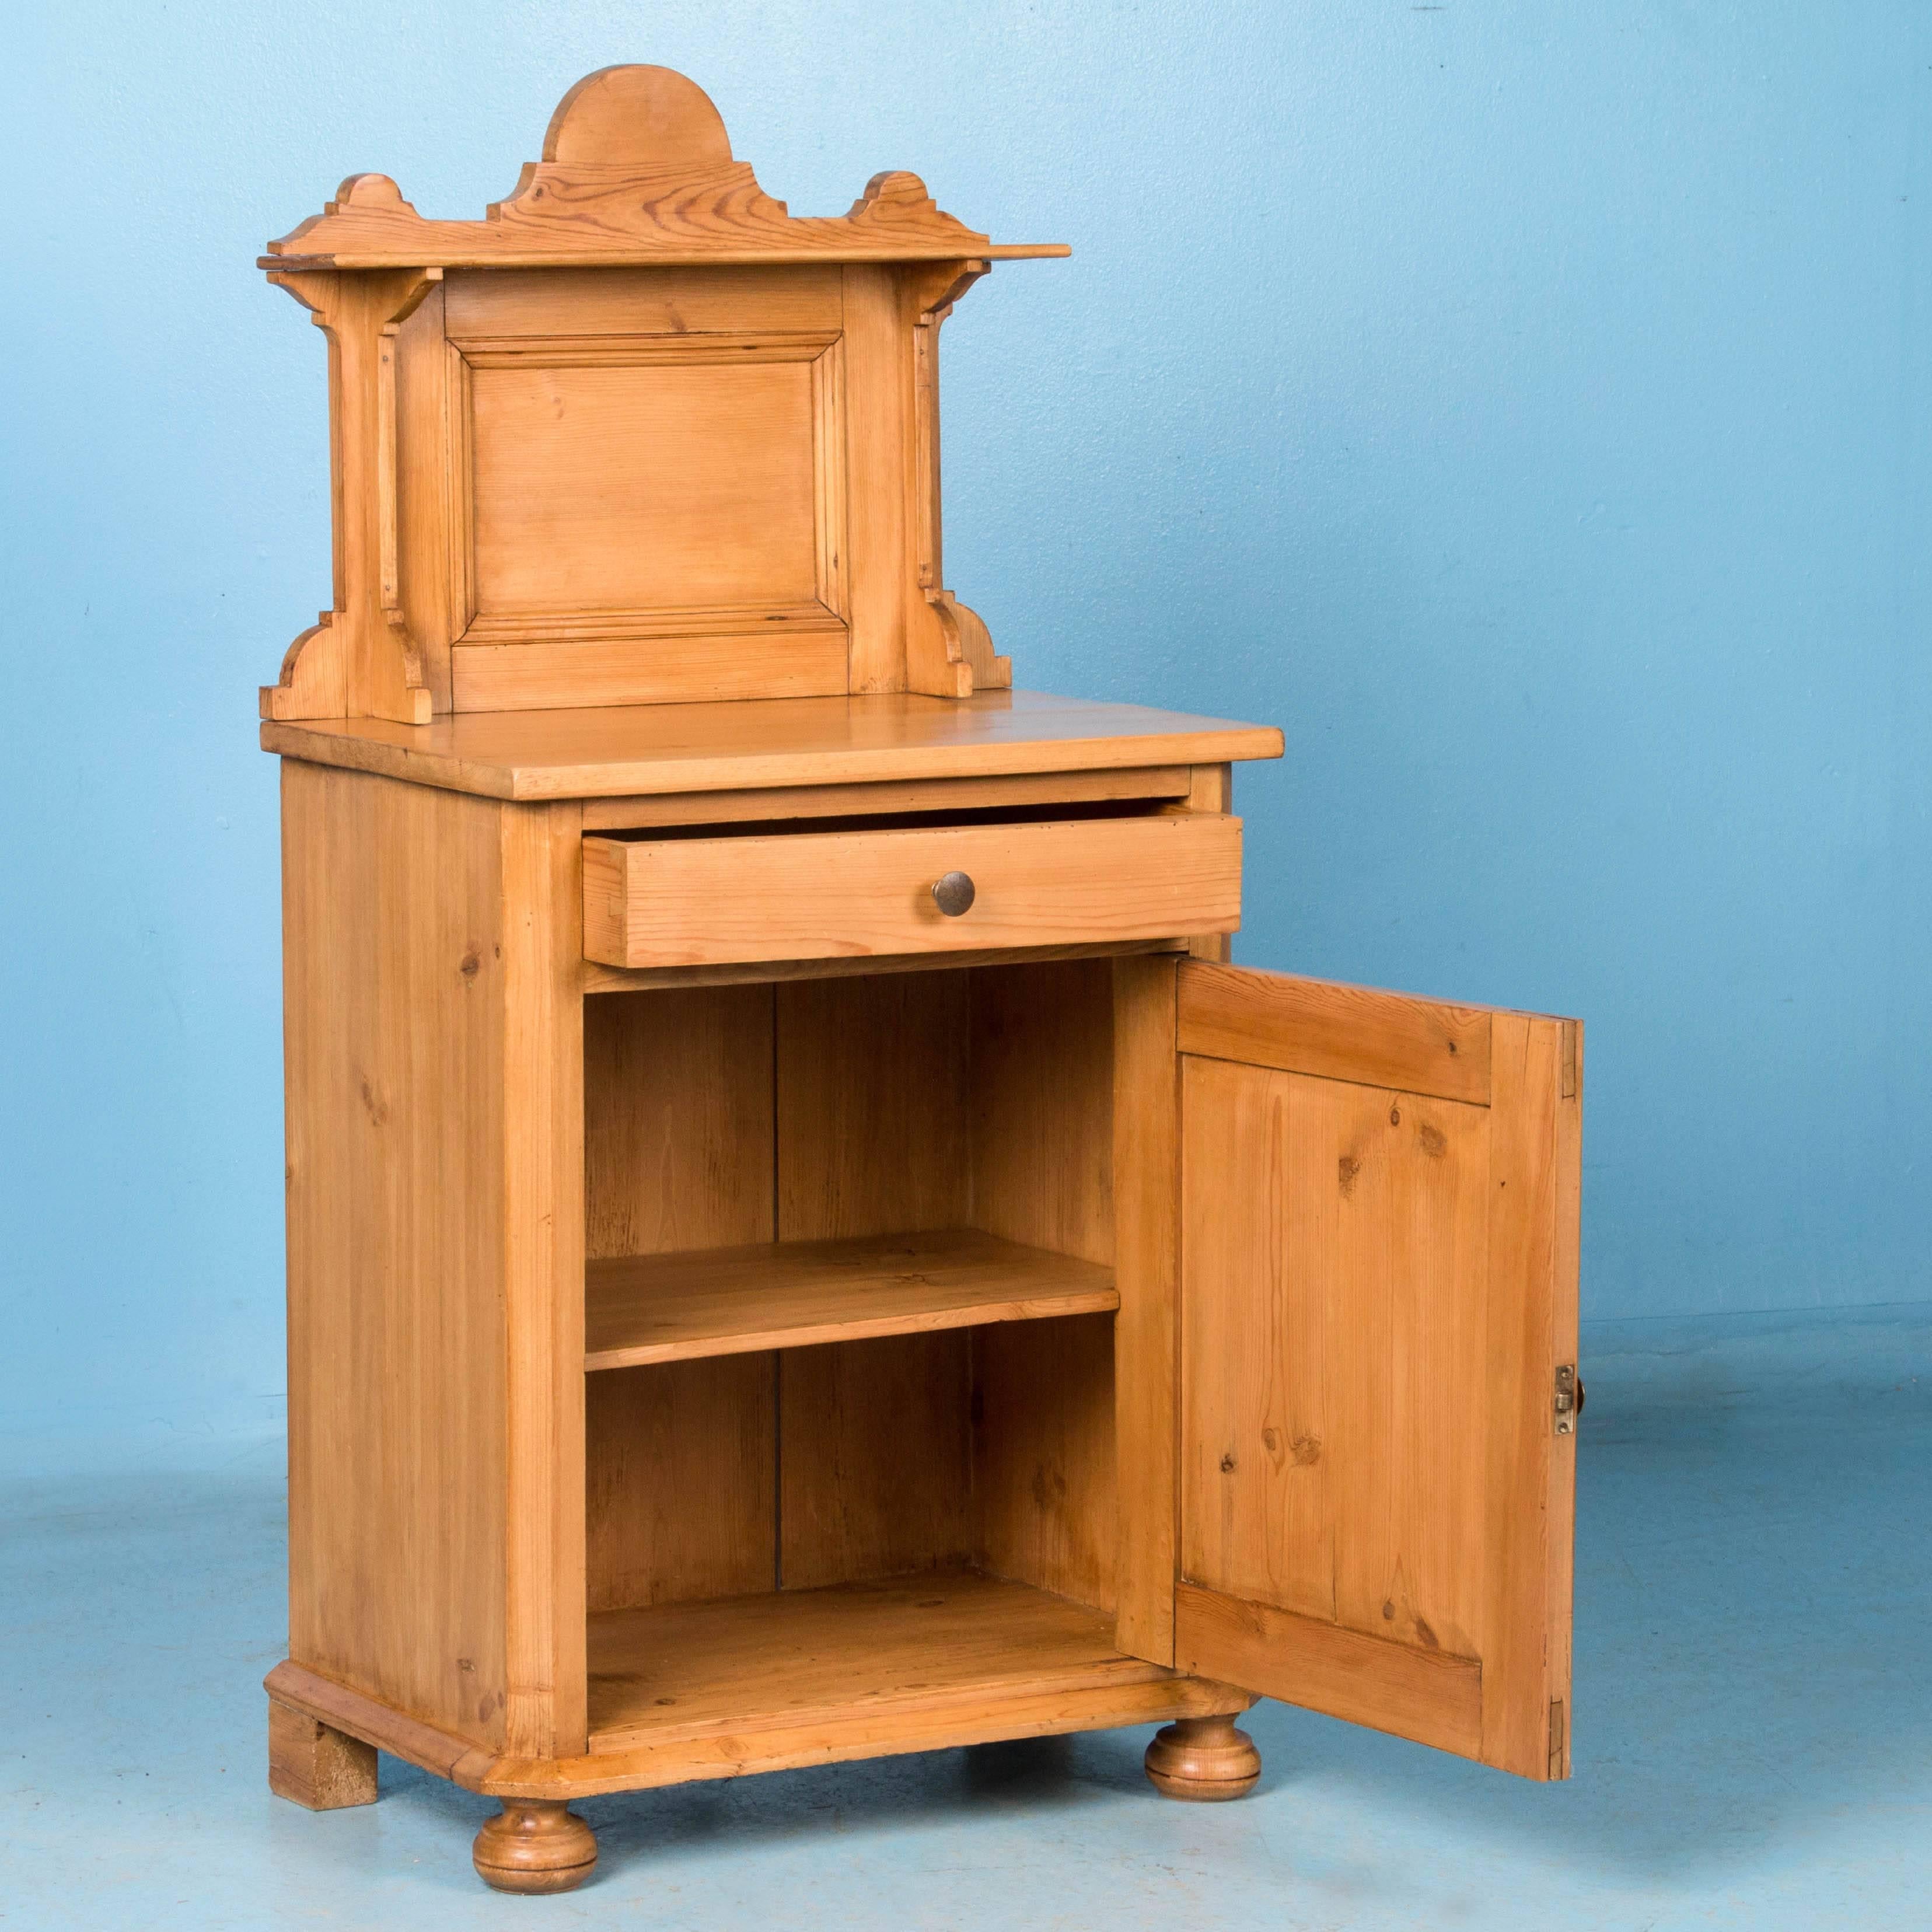 Simple and elegant describe this traditional country nightstand in natural pine with a soft wax finish. The tall paneled and molded back splash adds an architectural appeal and of course extra height, but can easily be removed if necessary. The case